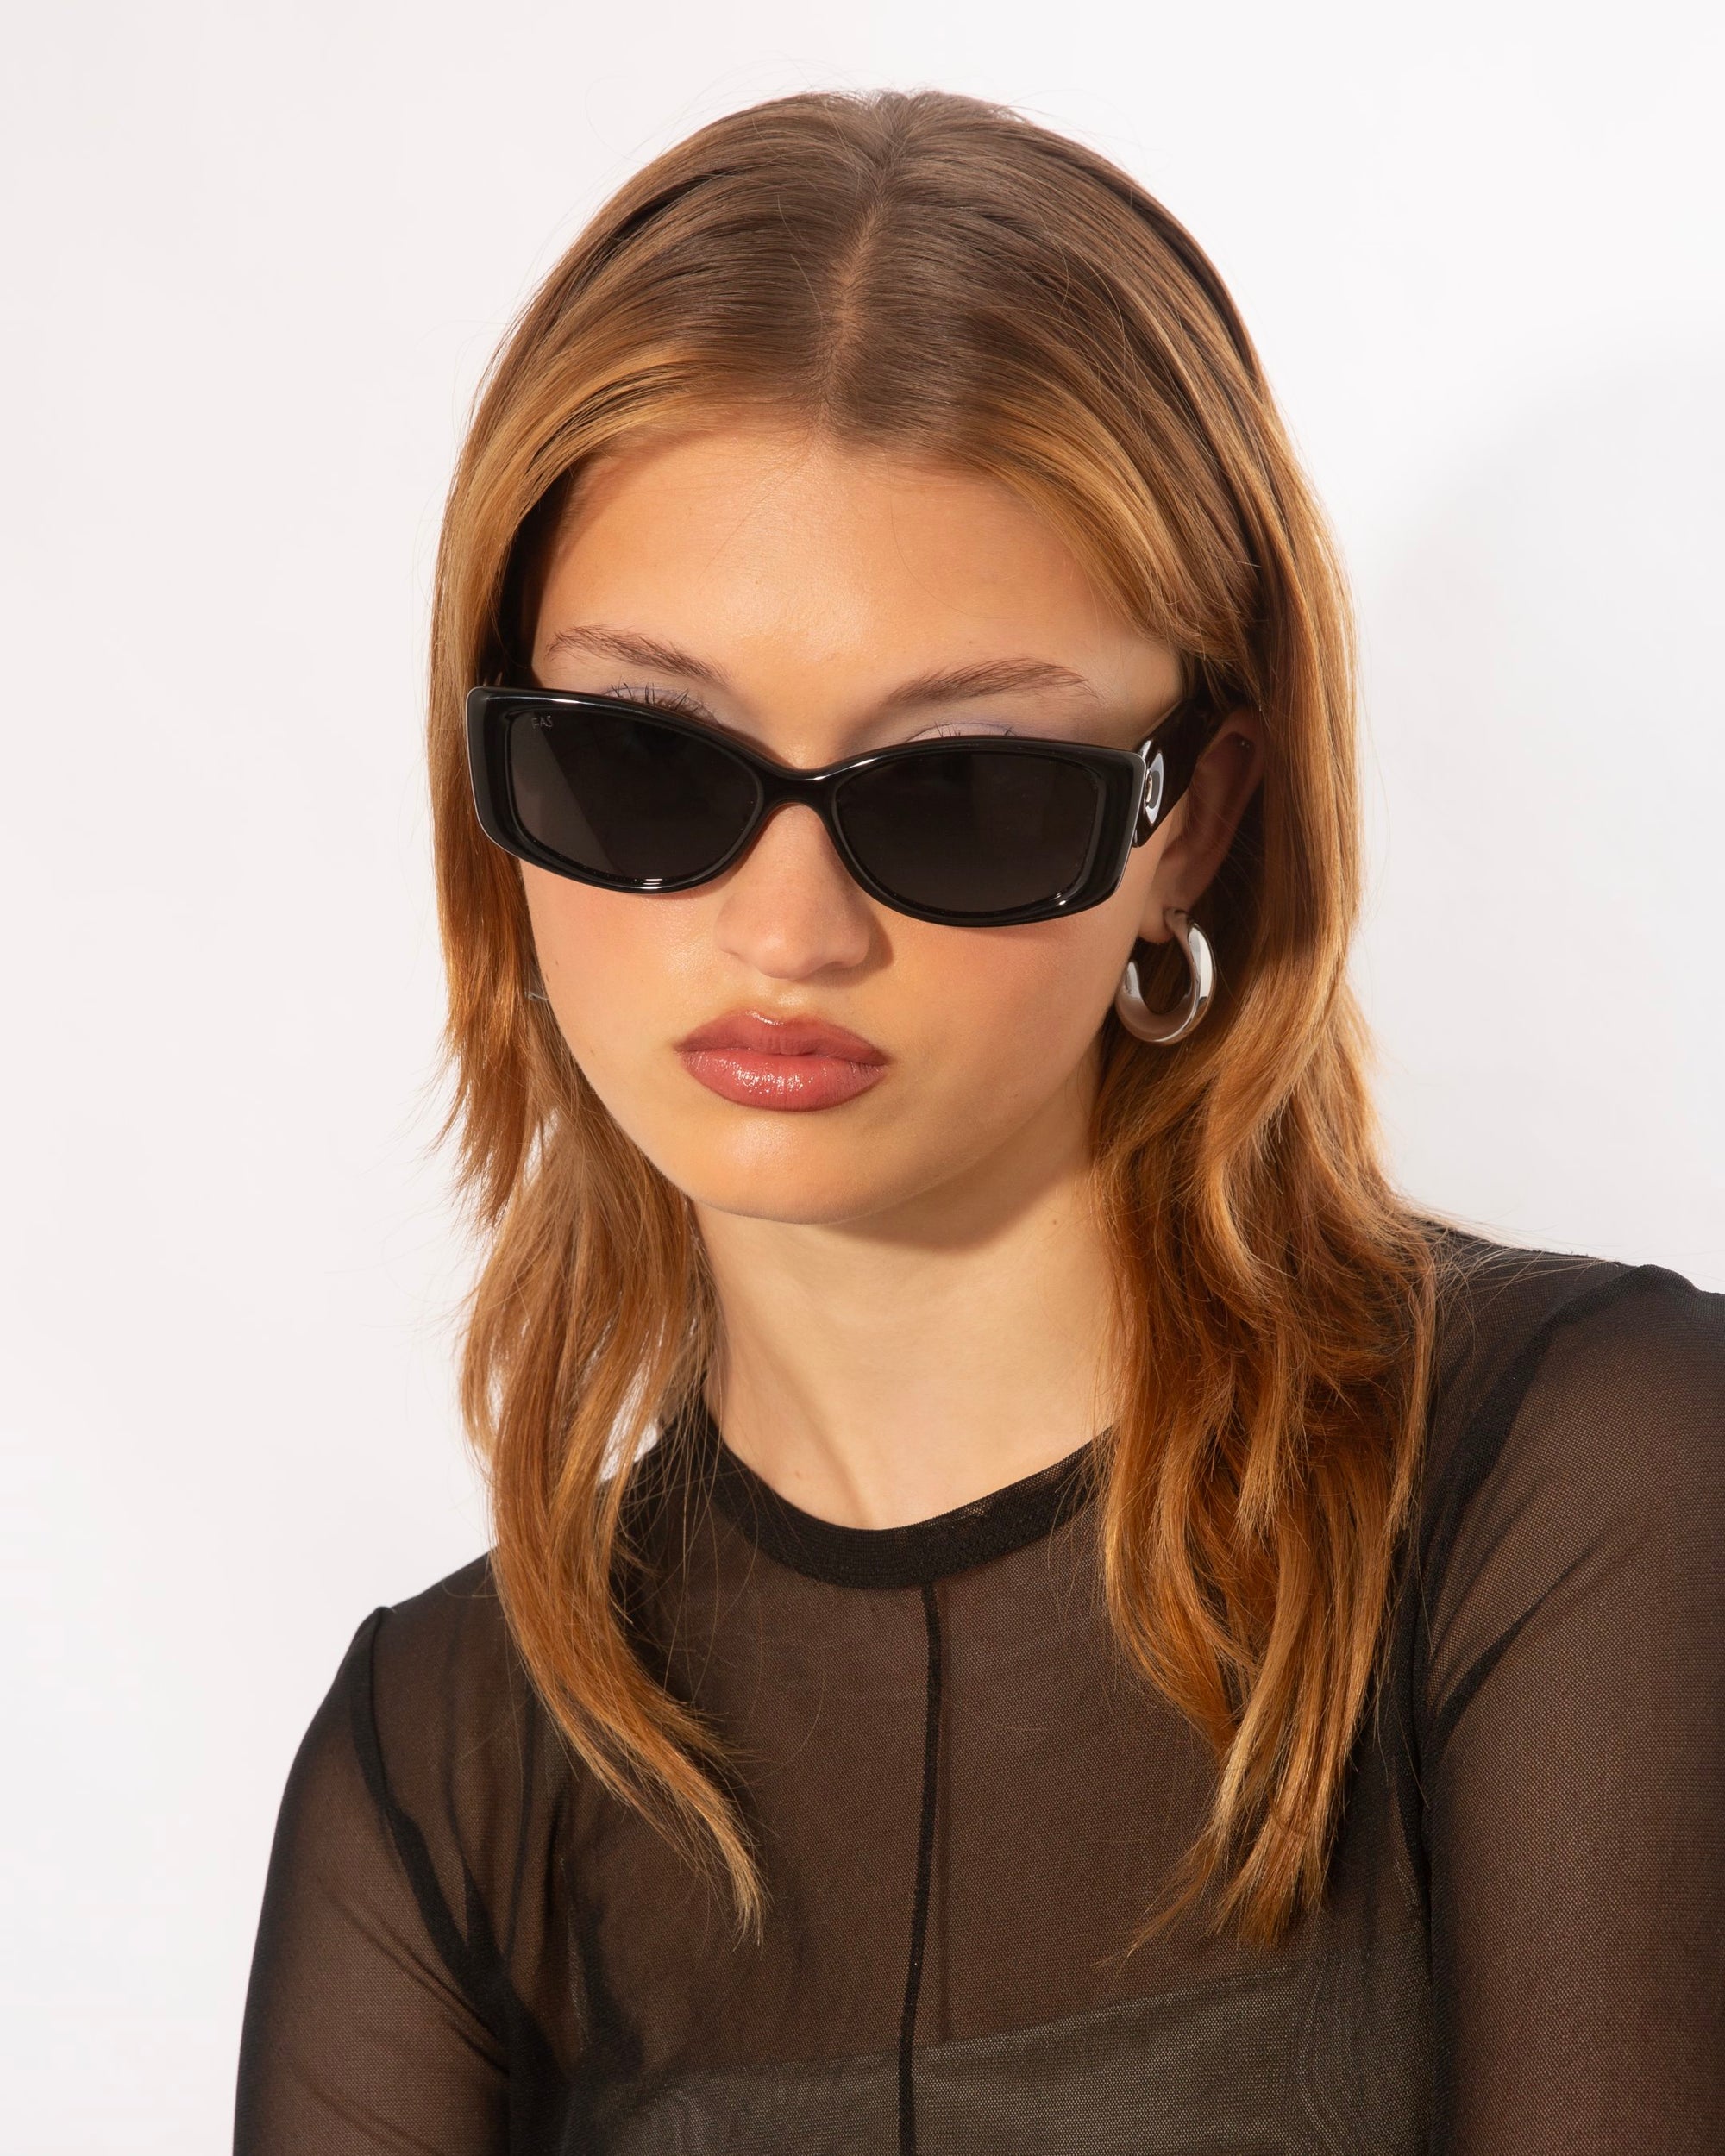 A person with light brown hair, wearing rectangular black For Art's Sake® Mene sunglasses and silver hoop earrings. Clad in a sheer black top, they have a calm expression and their head slightly tilted, embodying luxury eyewear style against a plain white background.